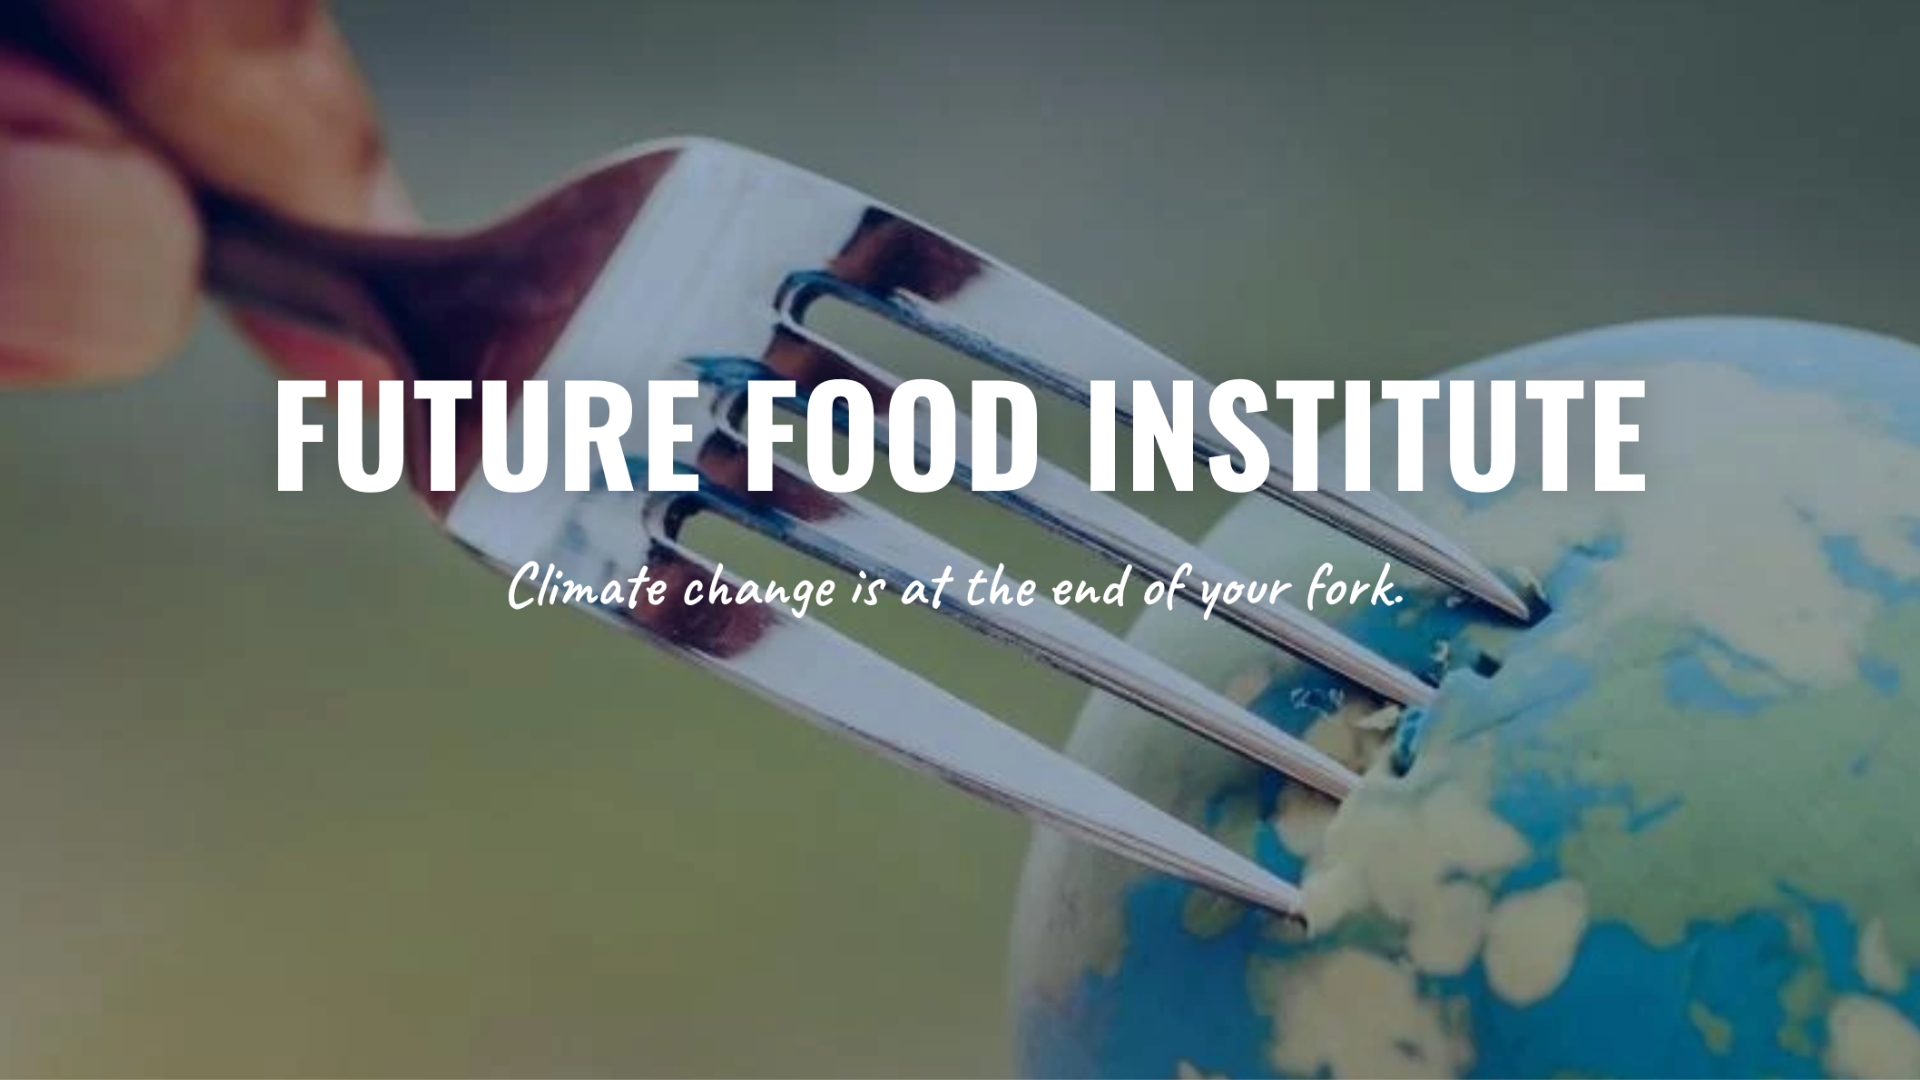 The Future Food Institute is a global think tank promoting food security and food culture